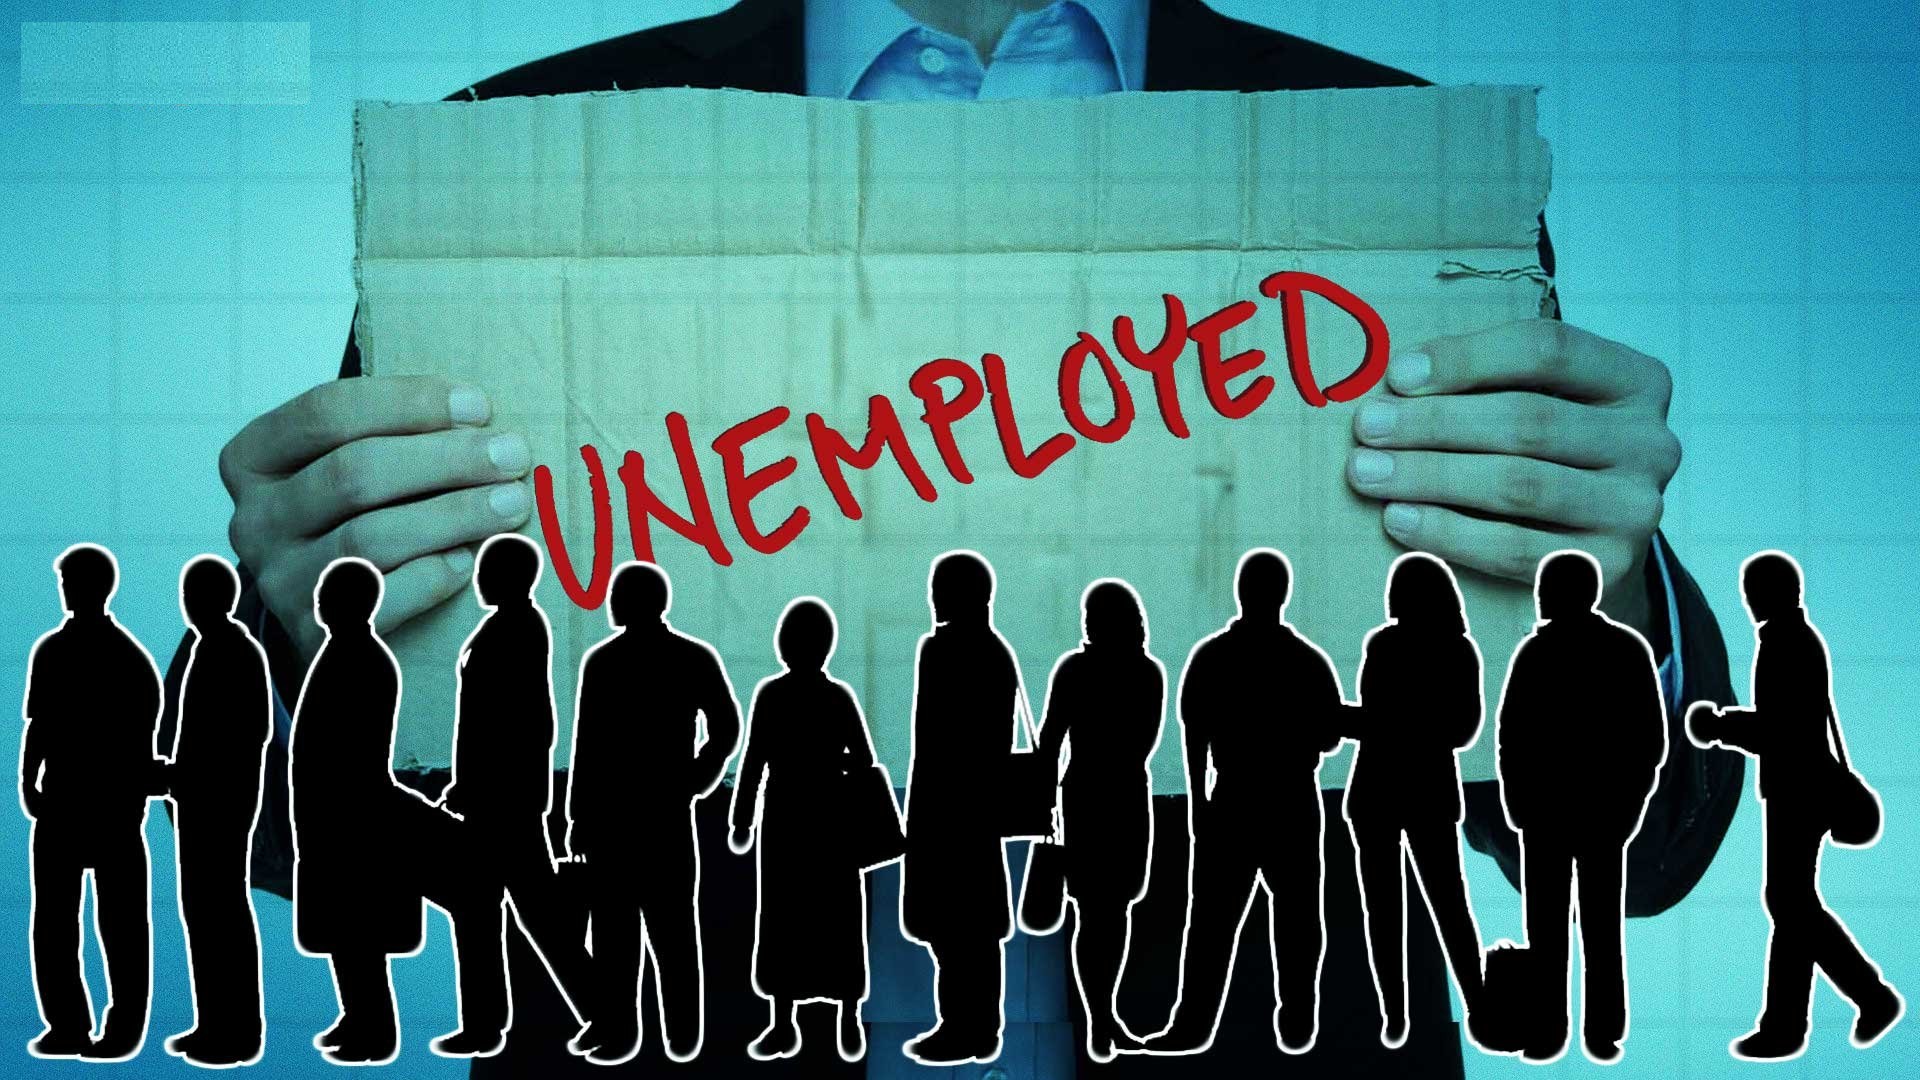 According to the survey, unemployment issues have not affected people